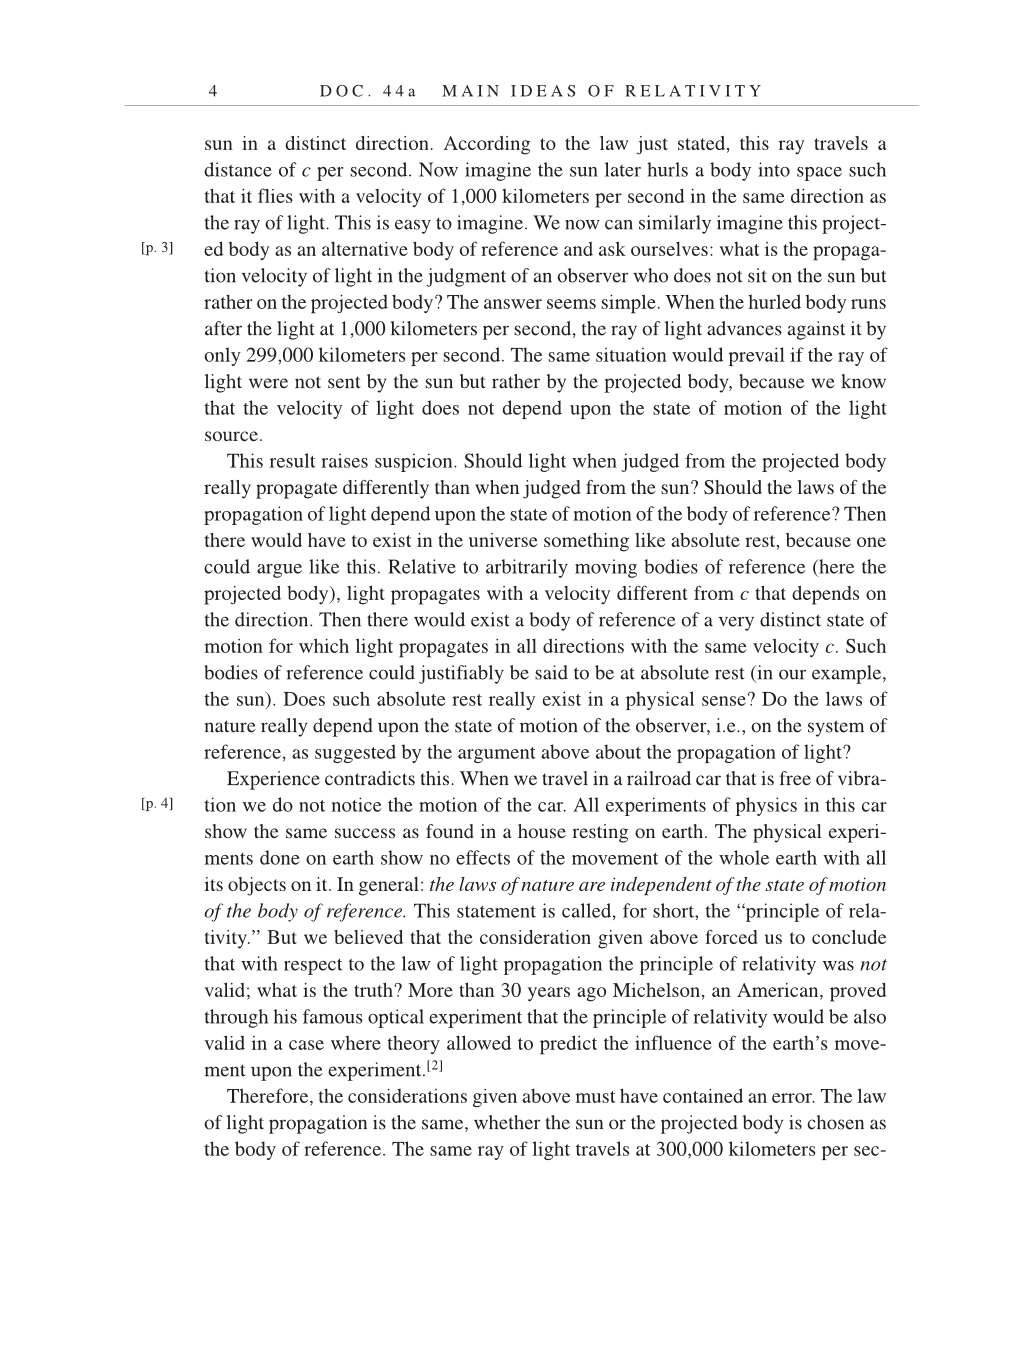 Volume 7: The Berlin Years: Writings, 1918-1921 (English translation supplement) page 4